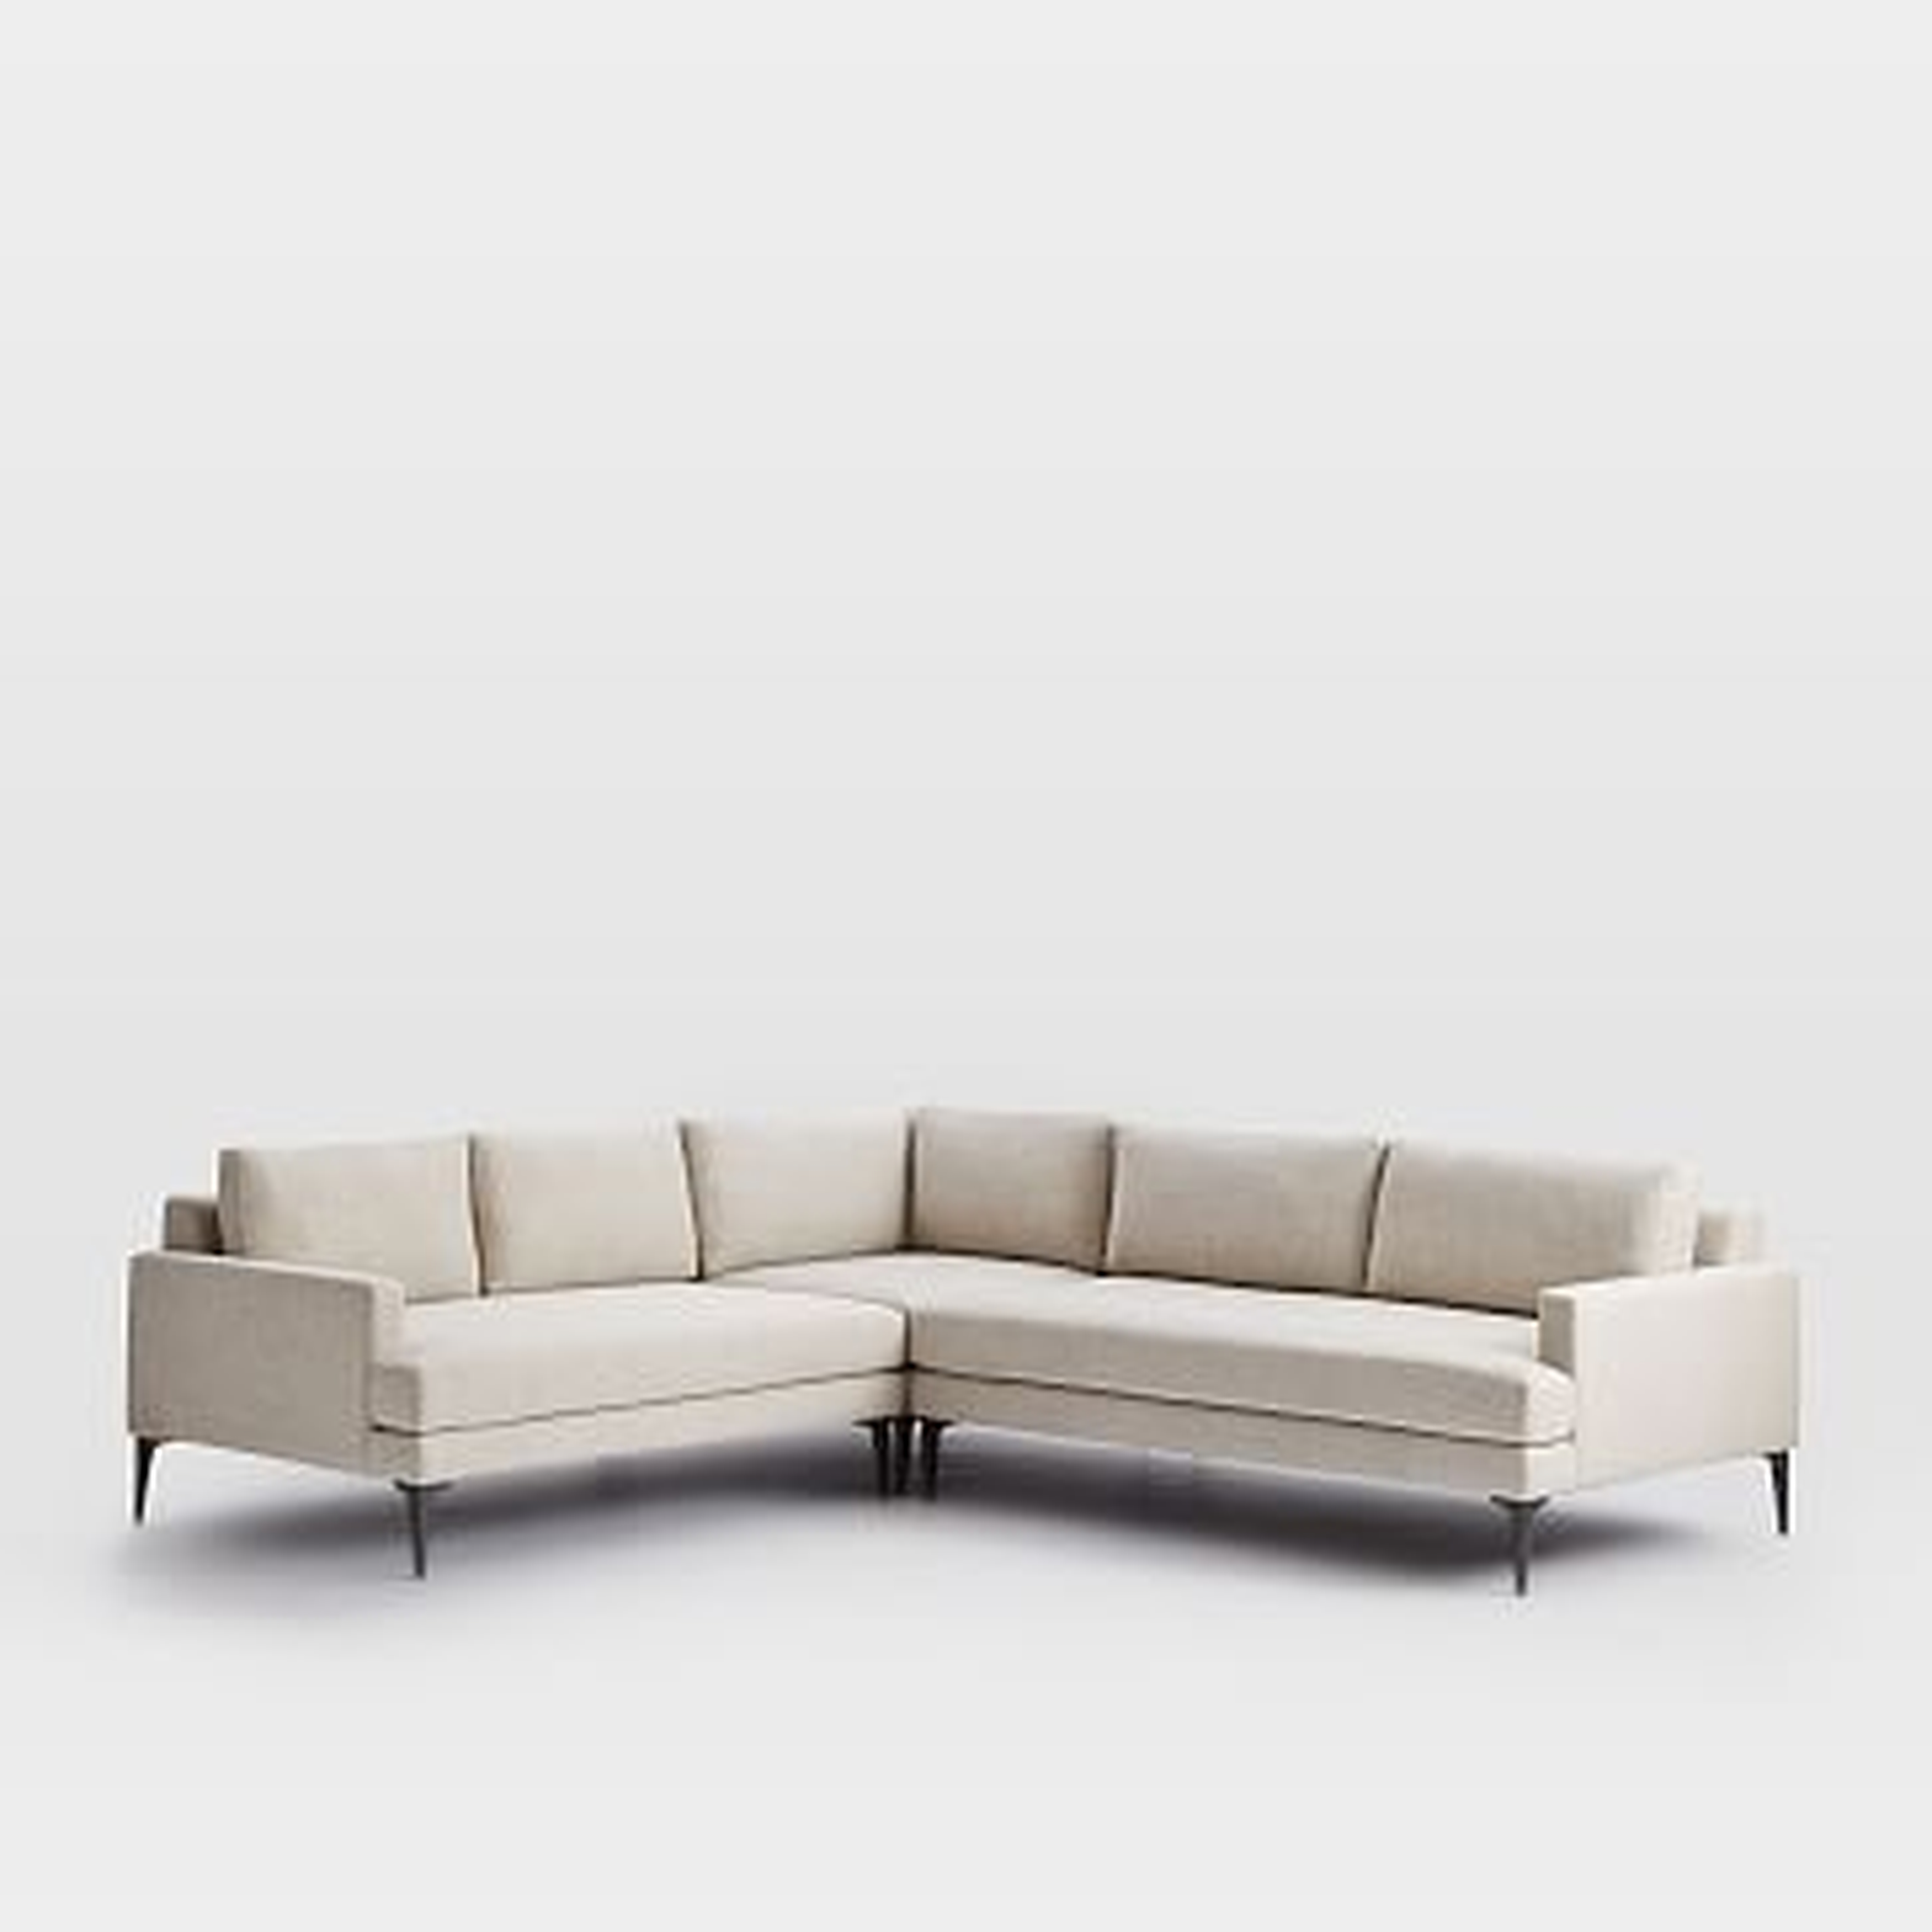 Andes Sectional Set 08: Left Arm 2 Seater Sofa, Corner, Right Arm 2.5 Seater Sofa, Poly , Twill, Dove, Dark Pewter - West Elm